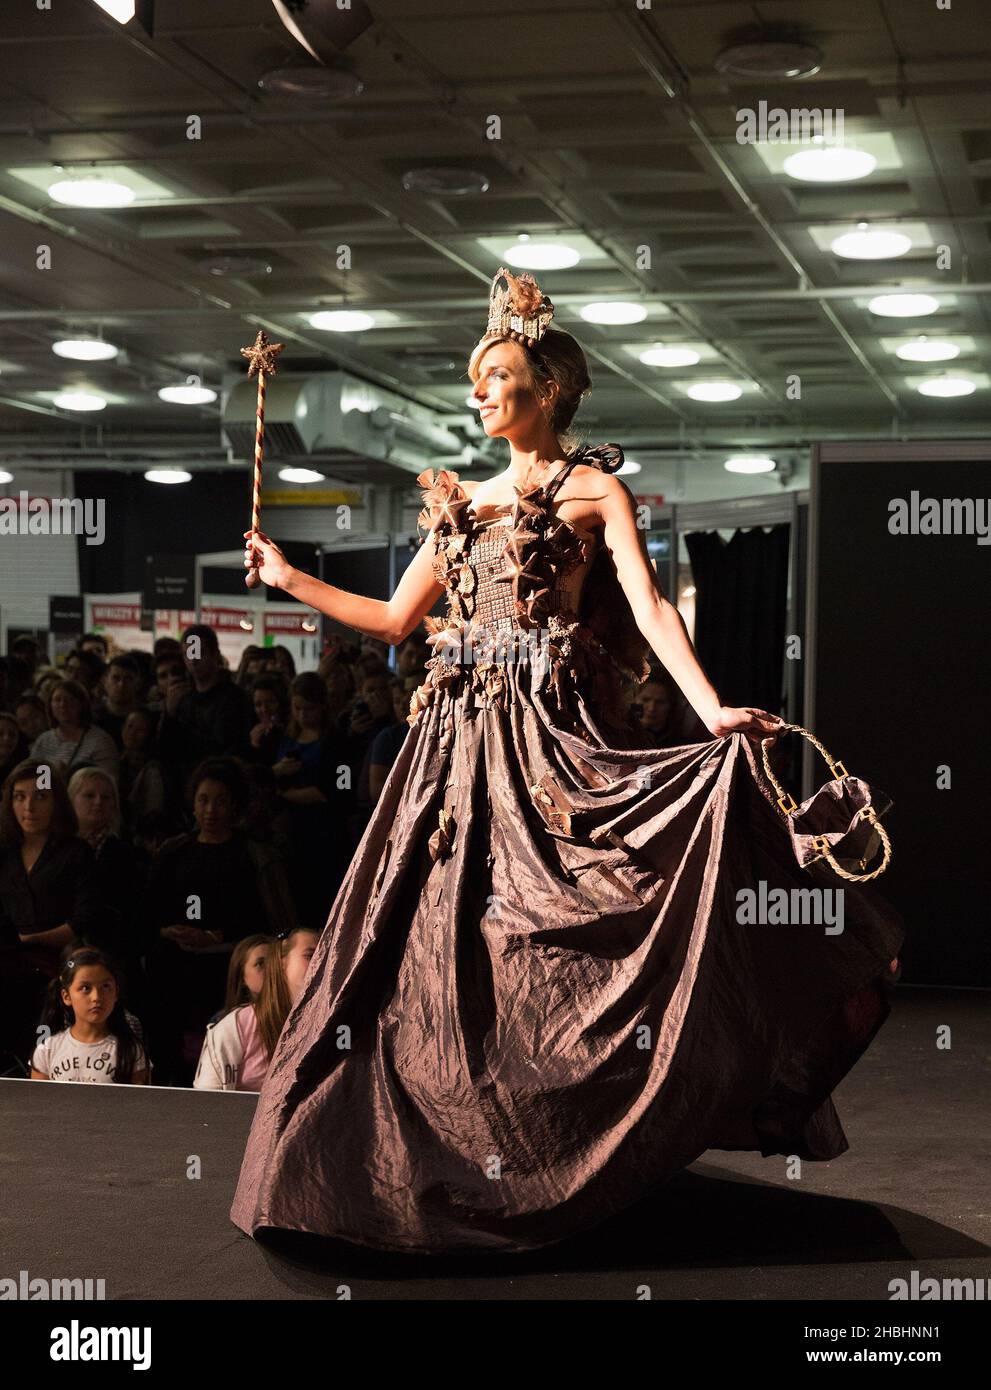 The Chocolate Show Fashion Models on Catwalk at Olympia in London. Stock Photo